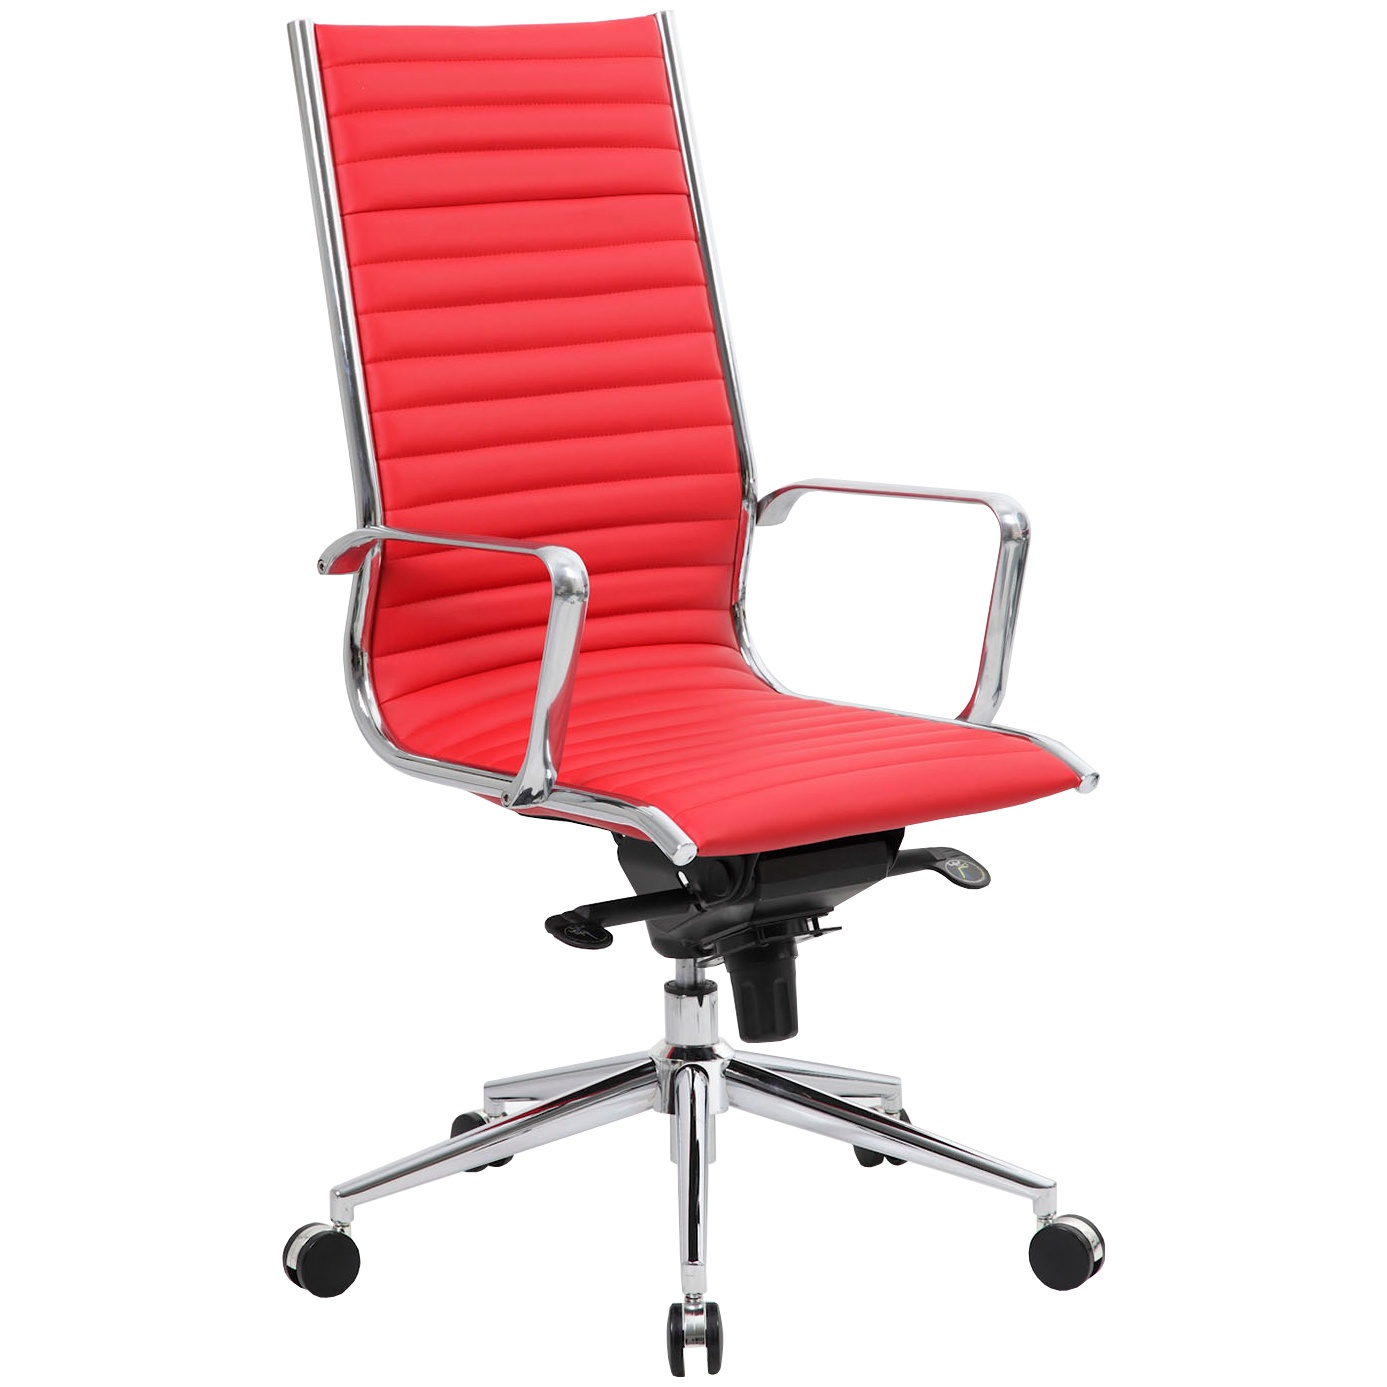 Abbey High Back Red Leather Office Chairs | Executive Office Chairs